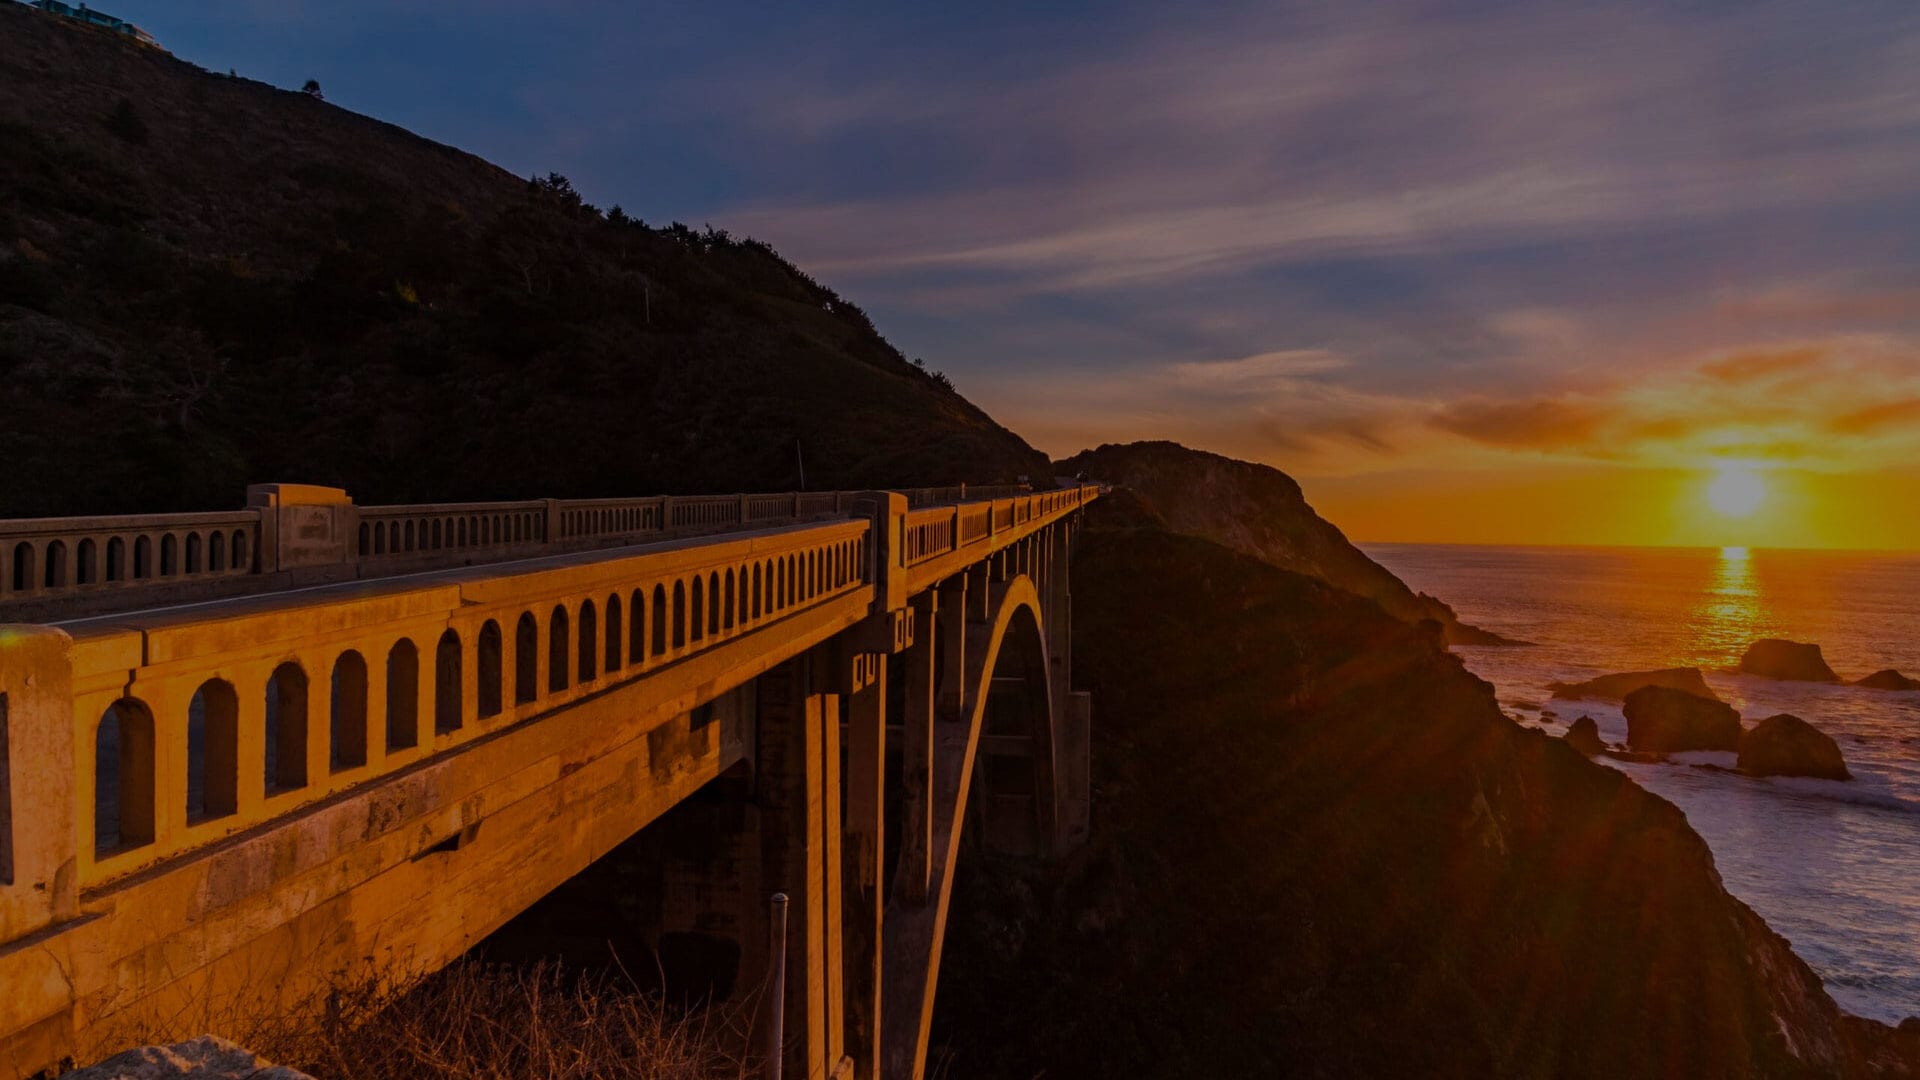 Planning a Pacific Coast Highway road trip